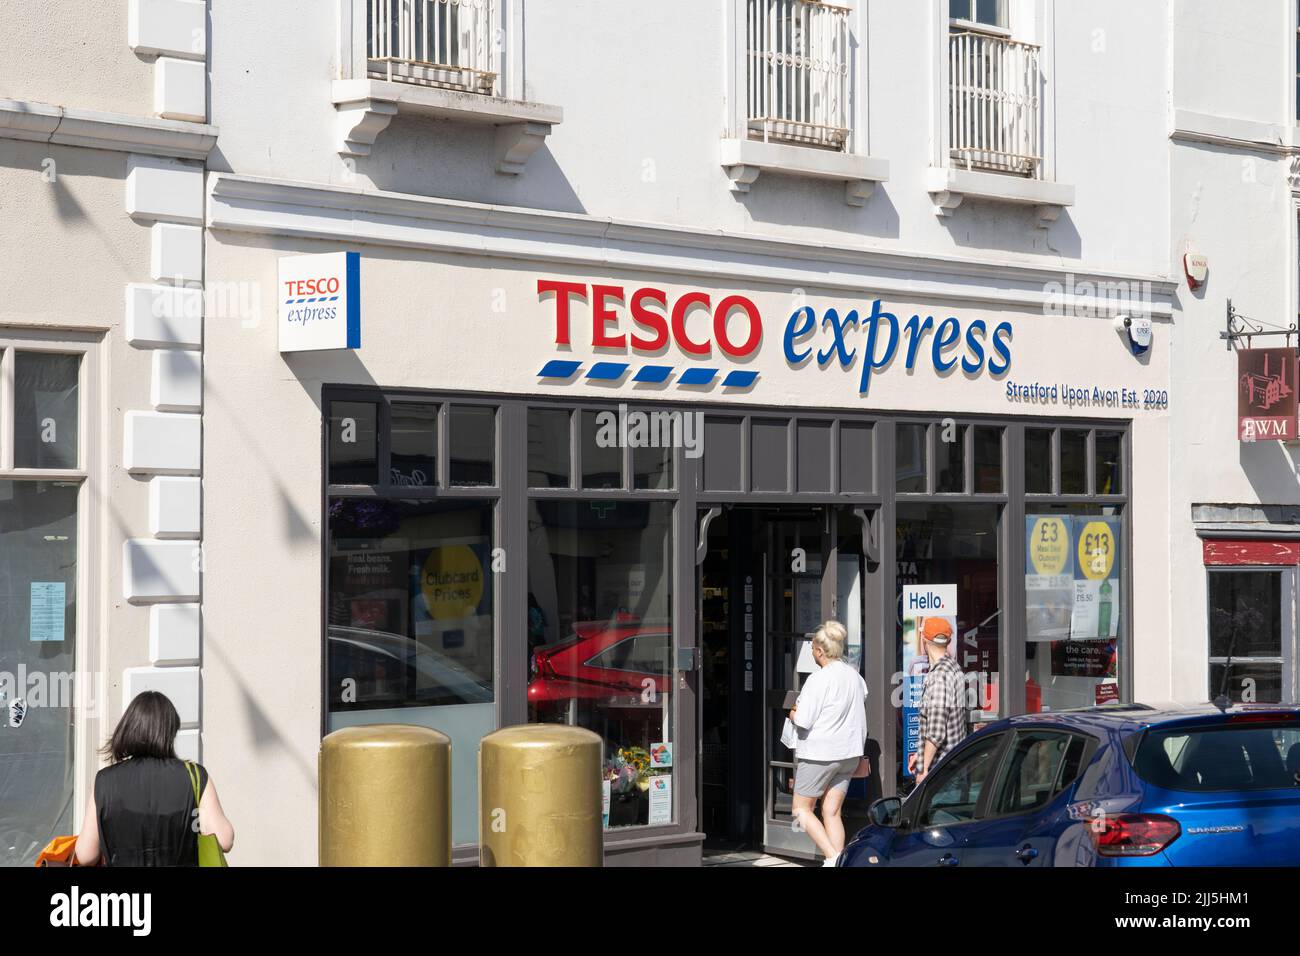 Shoppers entering a Tesco Express on Bridge Street in Stratford upon Avon, England. Concept - cost of living, food shopping, rising inflation Stock Photo